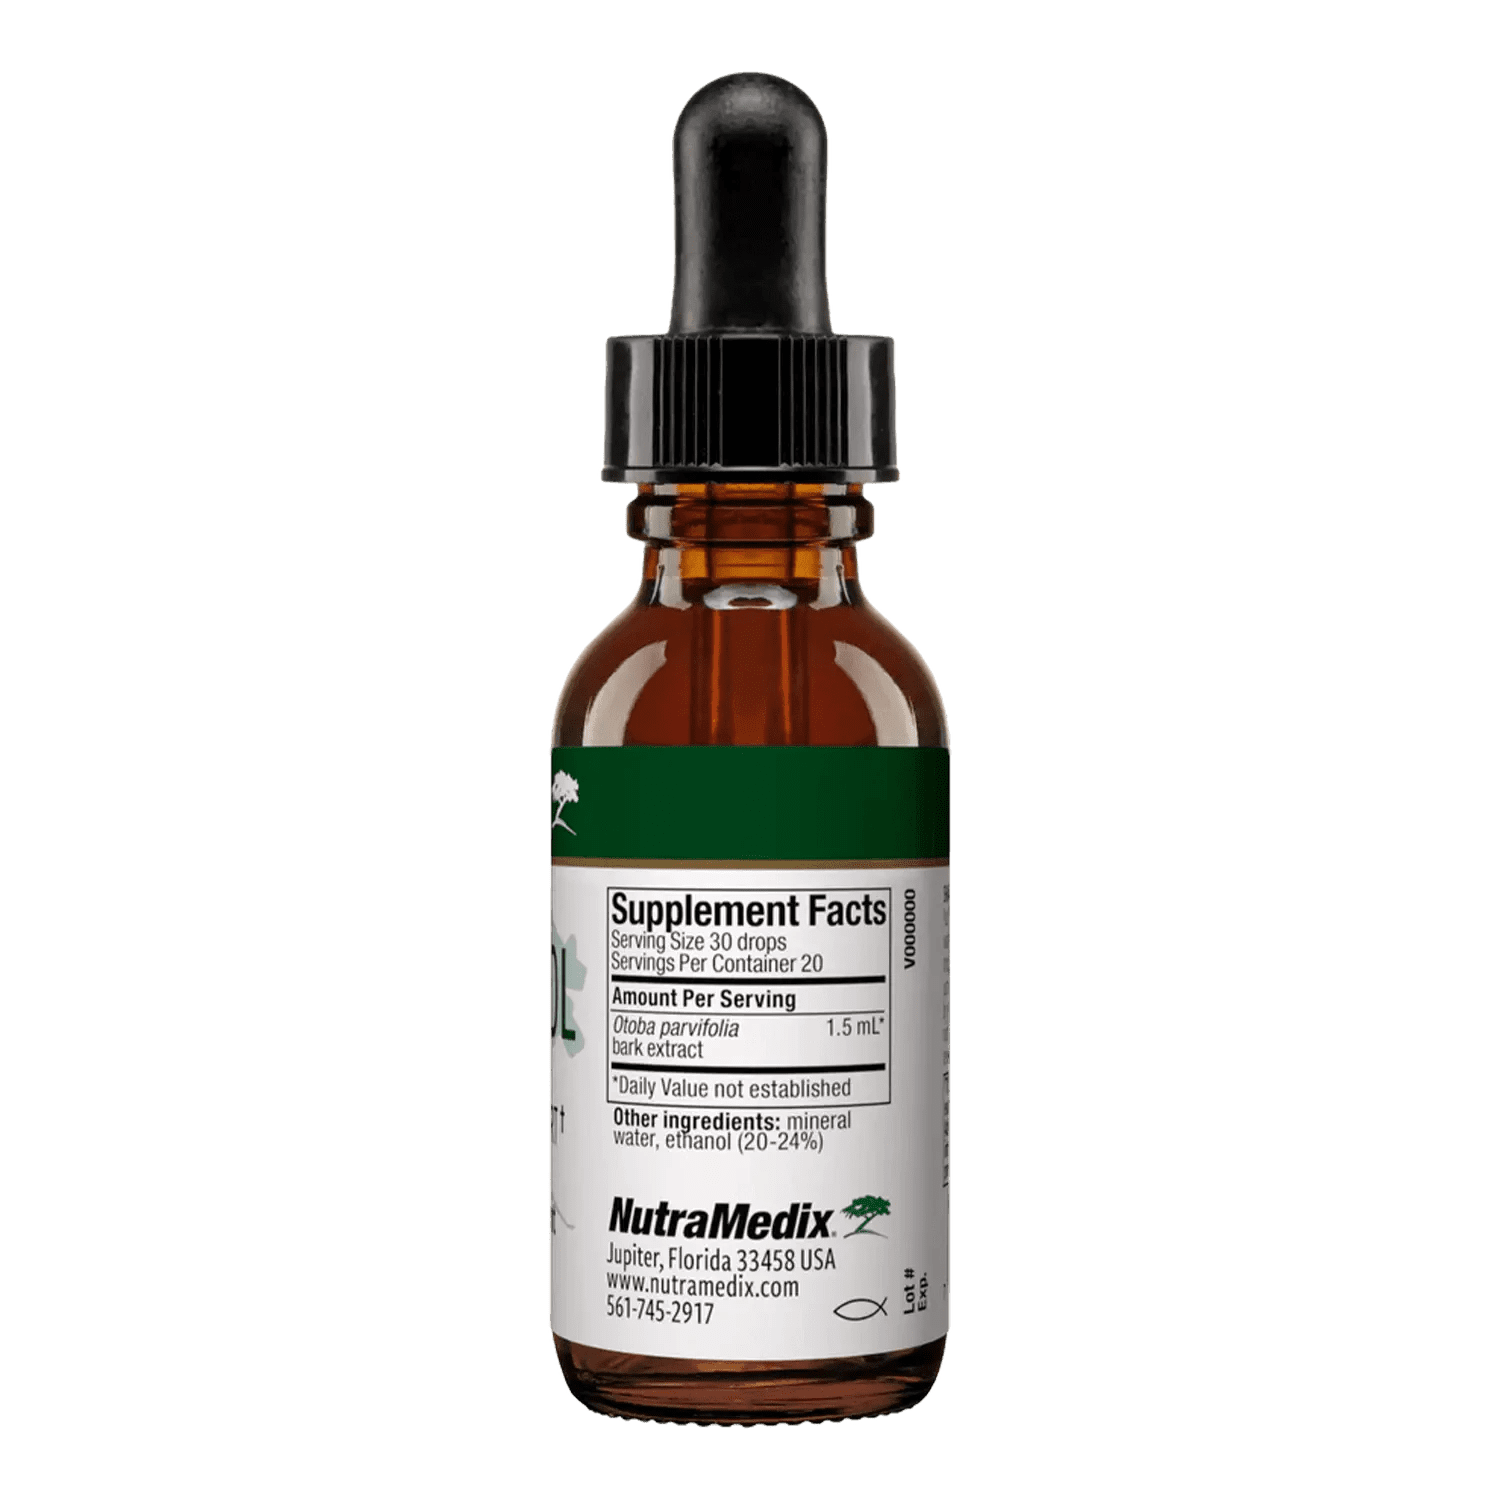 Banderol - 1oz - natural inflammatory support supplements back of the bottle